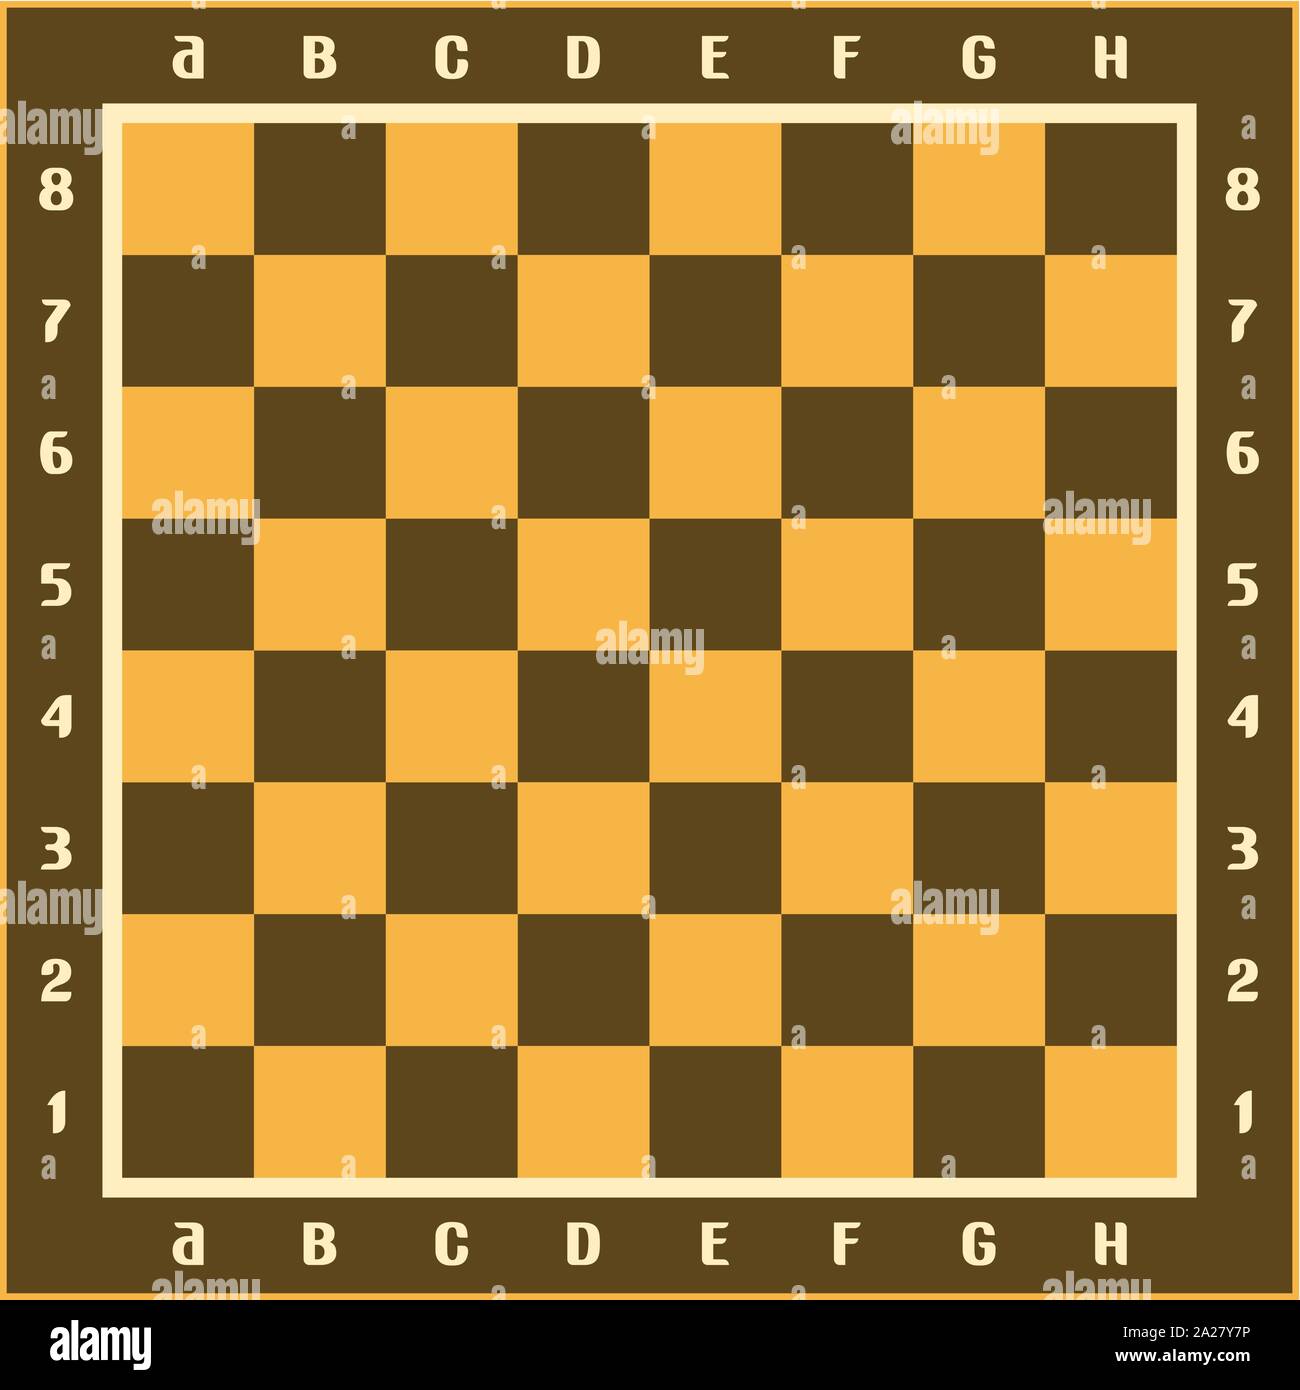 Vector illustration of classic chessboard, brown and yellow chess board with original letters and numbers, wooden checkerboard with empty squares top Stock Vector